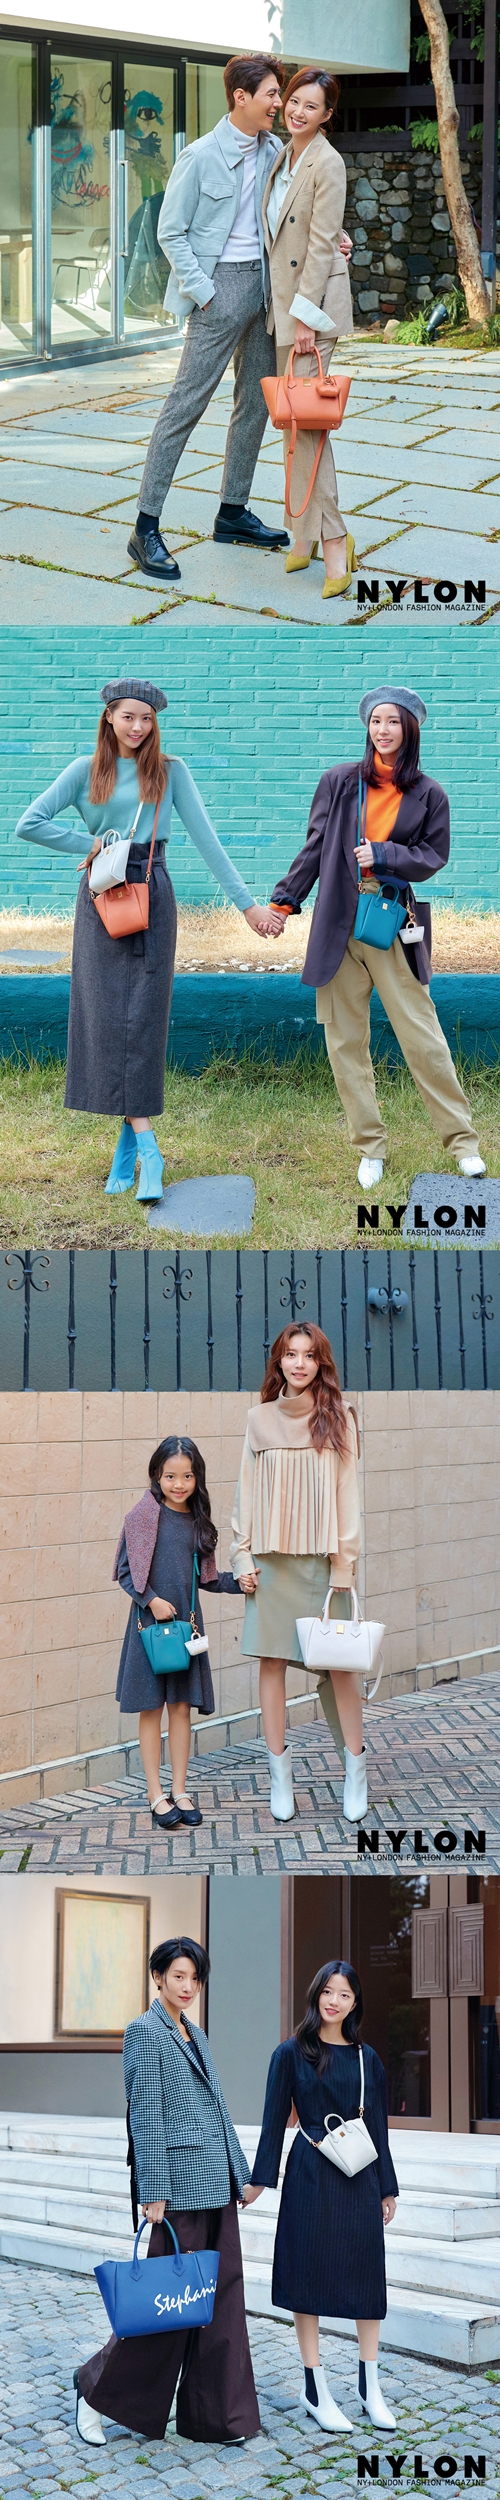 The fashion magazine Nylon (NYLON), which features styles in London and New York City, hosted a meaningful Donation campaign through November 2019.As a campaign to support the single mother family, 20 stars and influencers from the popular Actor Kim Seo-hyung to the rising Actor Lee Ho-jung were willing to donate talent.In a pictorial consisting of 10 teams of various couples, he directed a friendly appearance with Actor Kim Hyun-soo, who played together in the movie Girls Ghost Story Reboot: My Alma, which is scheduled to open in November, and actress Jungsia, who is a mother and daughter like Bung-bap, and her daughter Baek Seo-woo also agreed.In addition, 10 teams of couples, mothers, friends, and colleagues will be released in the November issue of Nylon.Meanwhile, some of the Donation campaign revenues are donated to the Eastern Social Welfare Society.